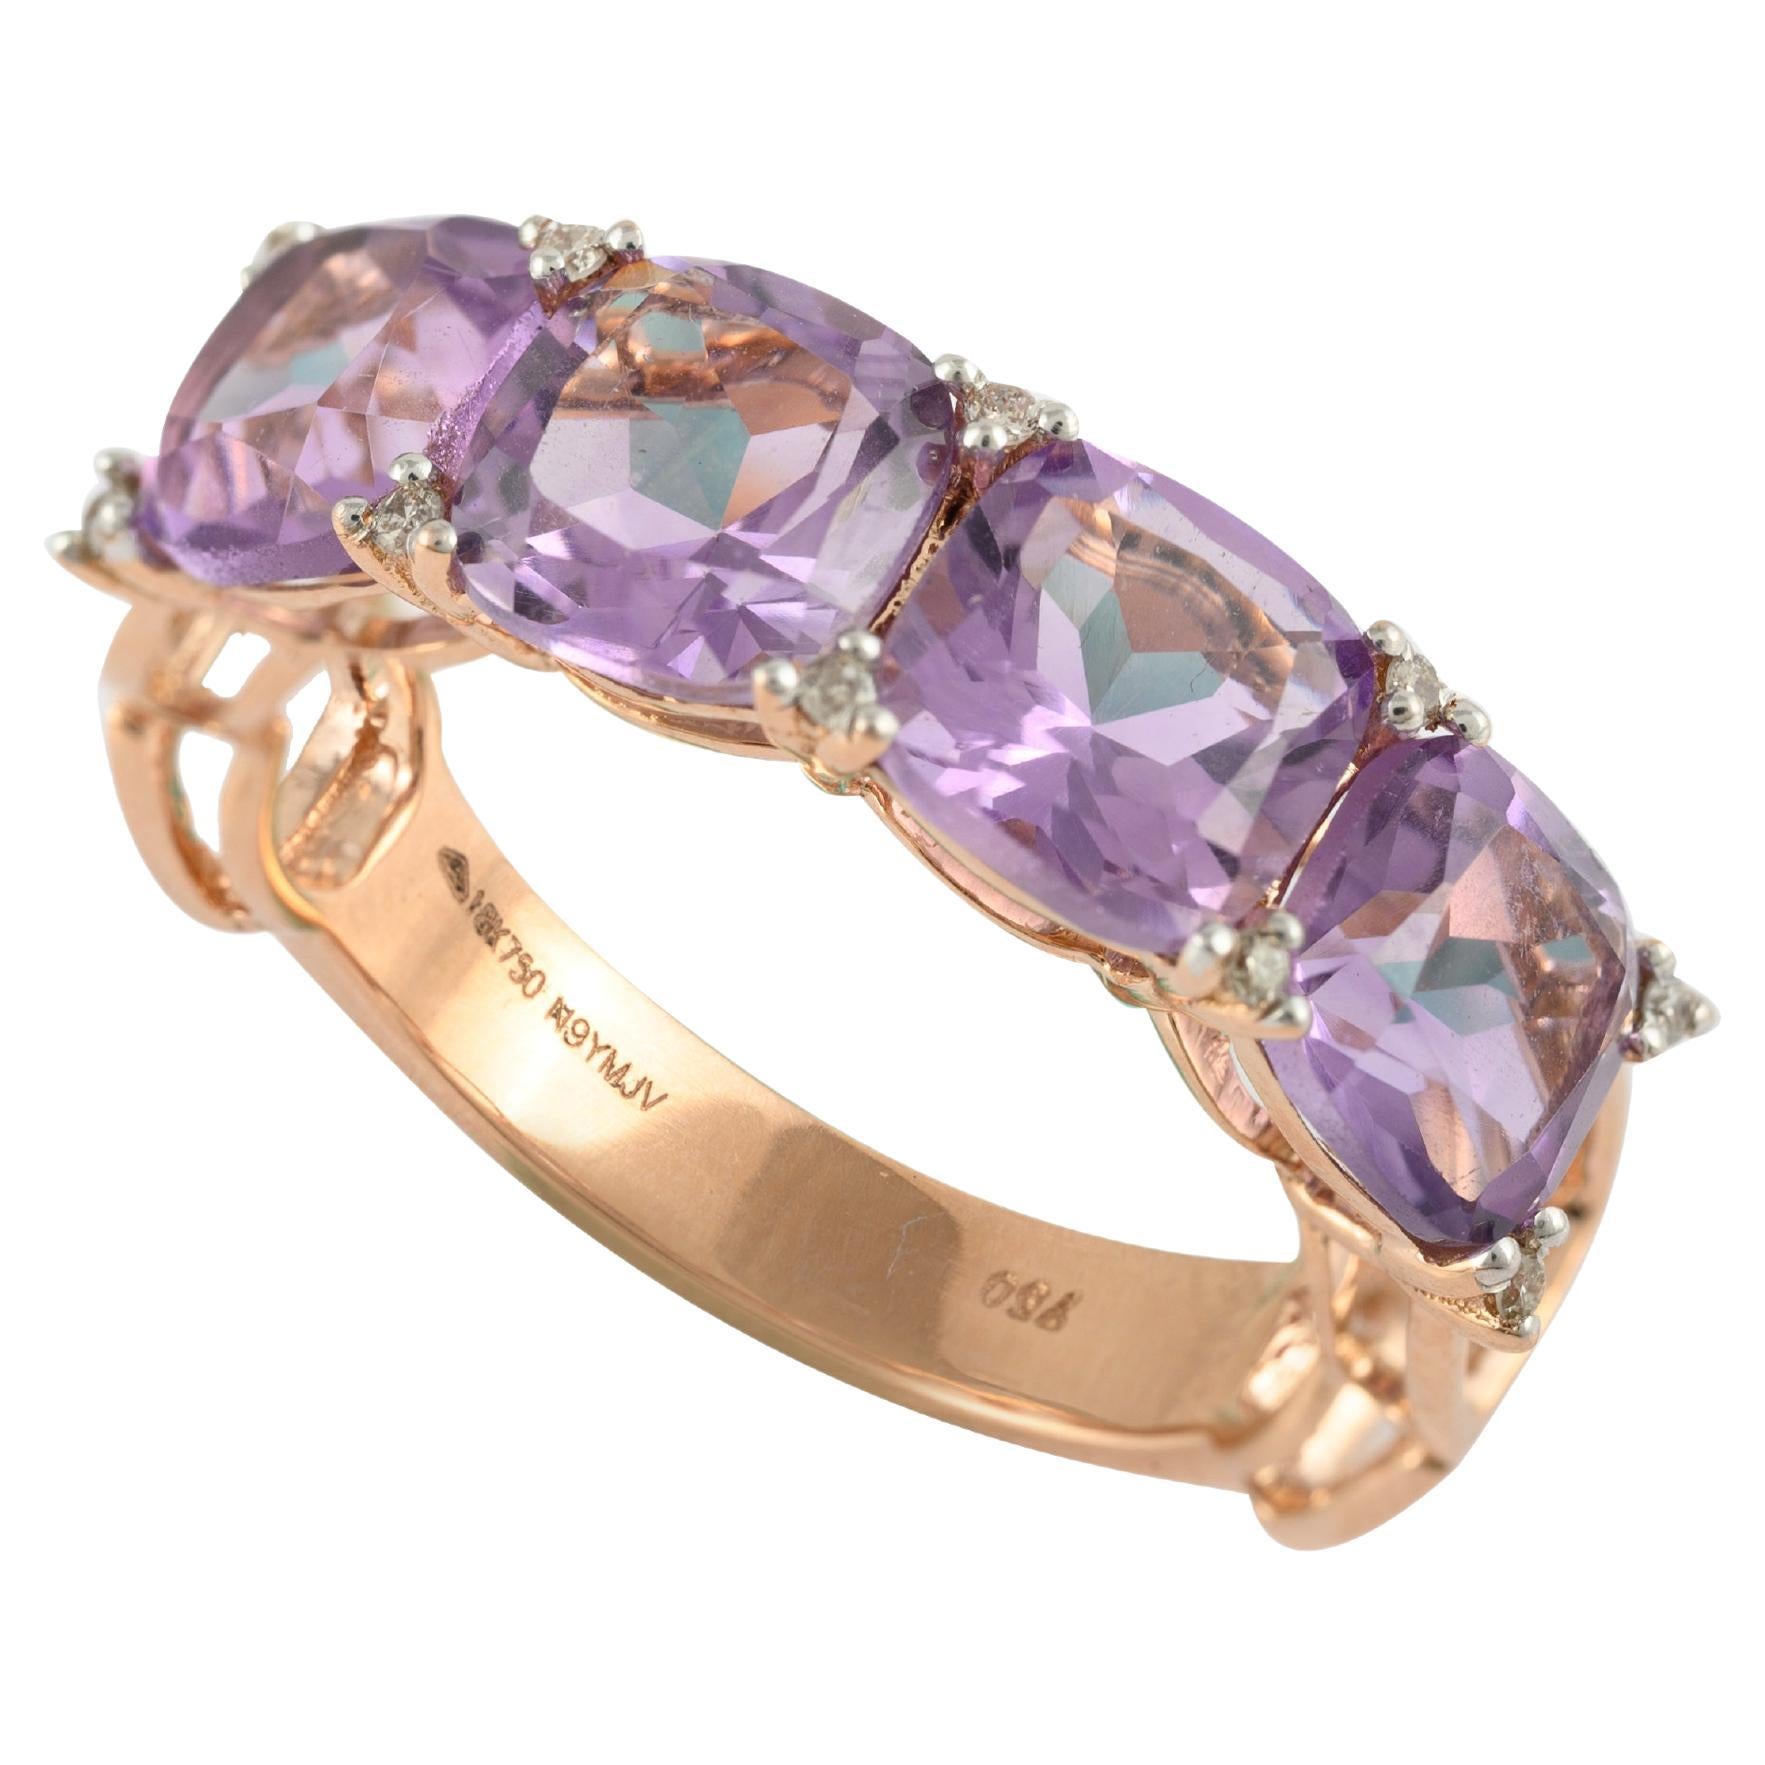 For Sale:  2.92 Carat Cushion Amethyst & Diamond Half Band Ring in 18k Solid Rose Gold